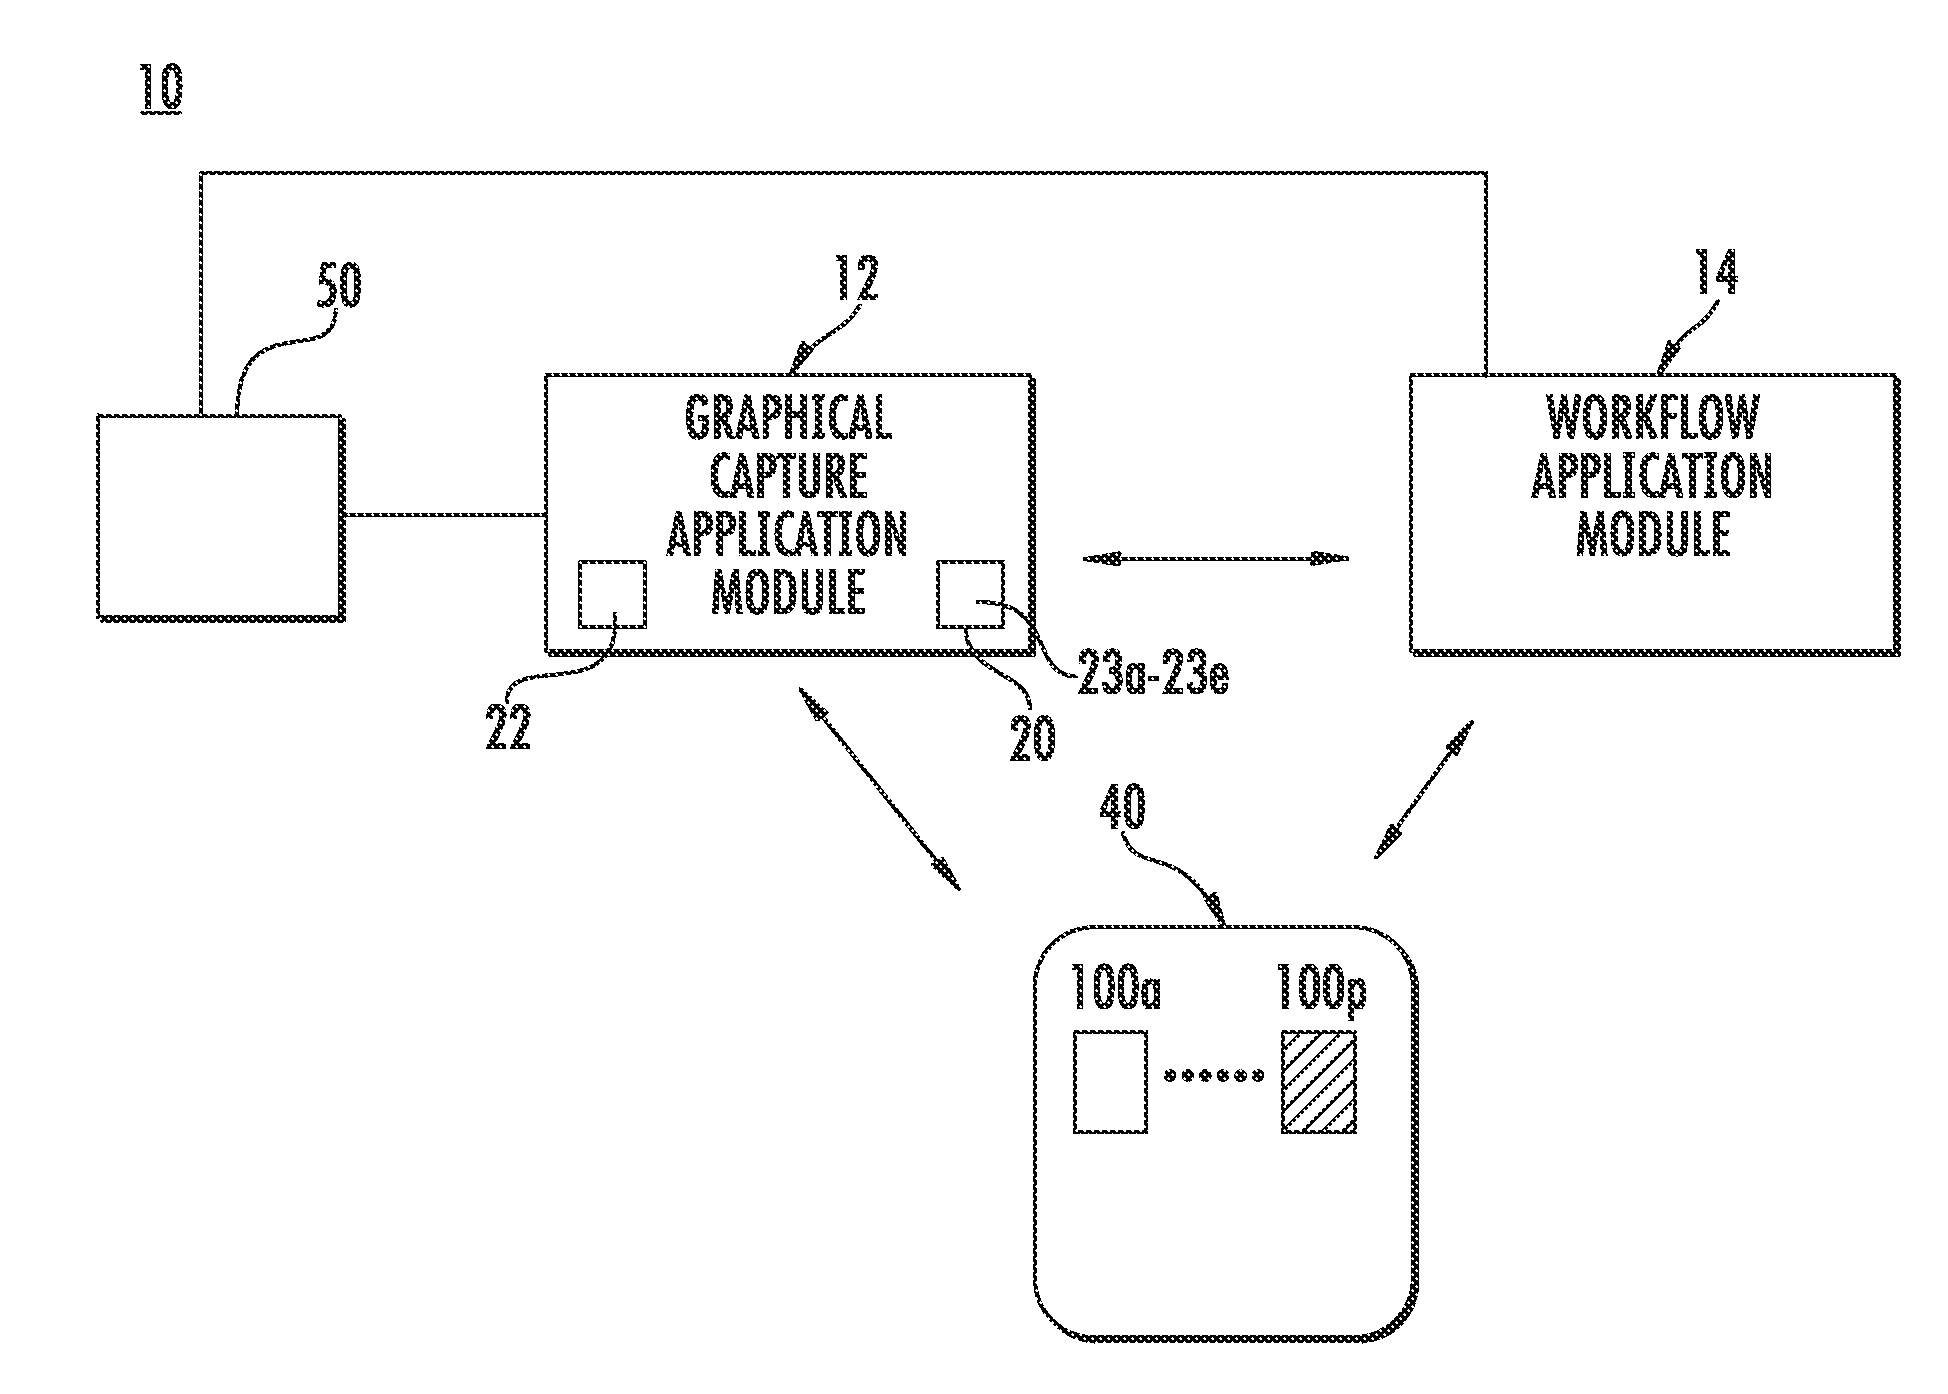 Method to generate workflow tasks directly from flowcharts for processing events in event-driven judicial case management systems with workflow control